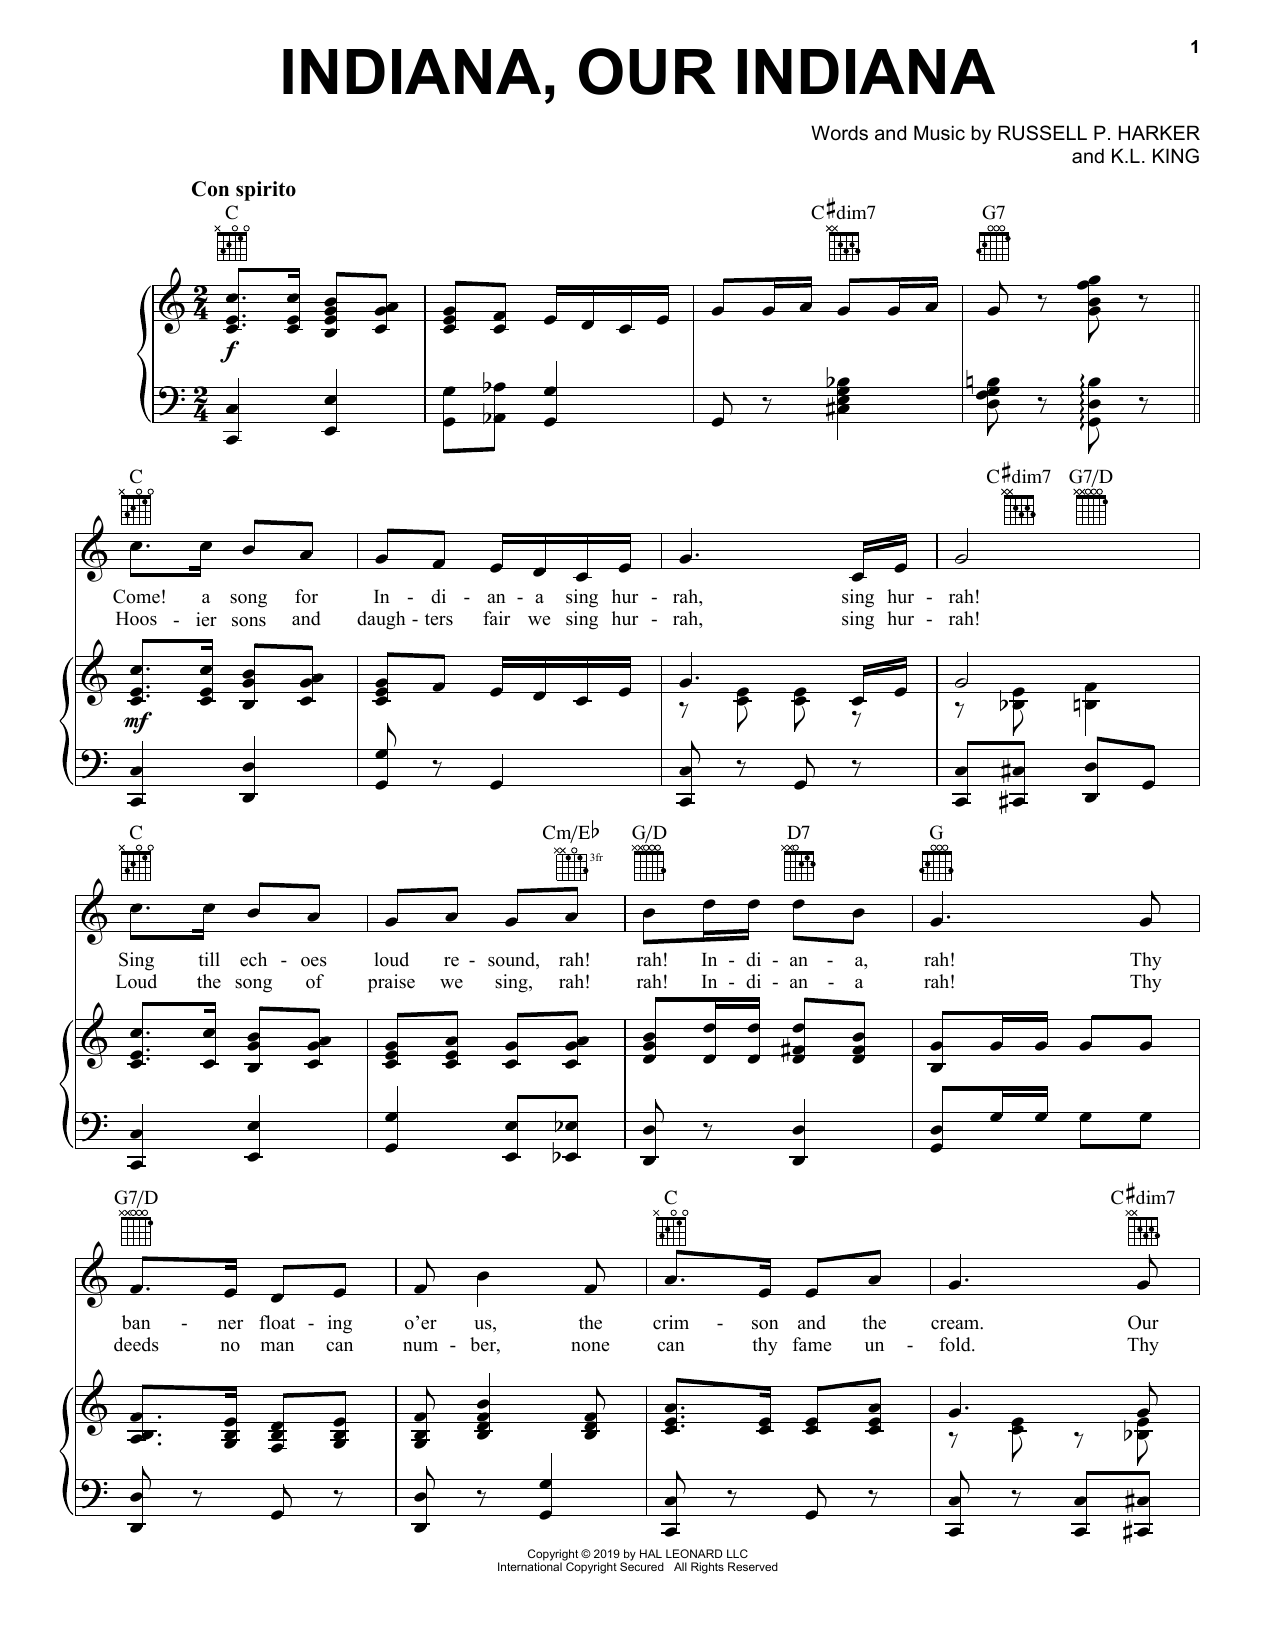 Download K.L. King Indiana, Our Indiana Sheet Music